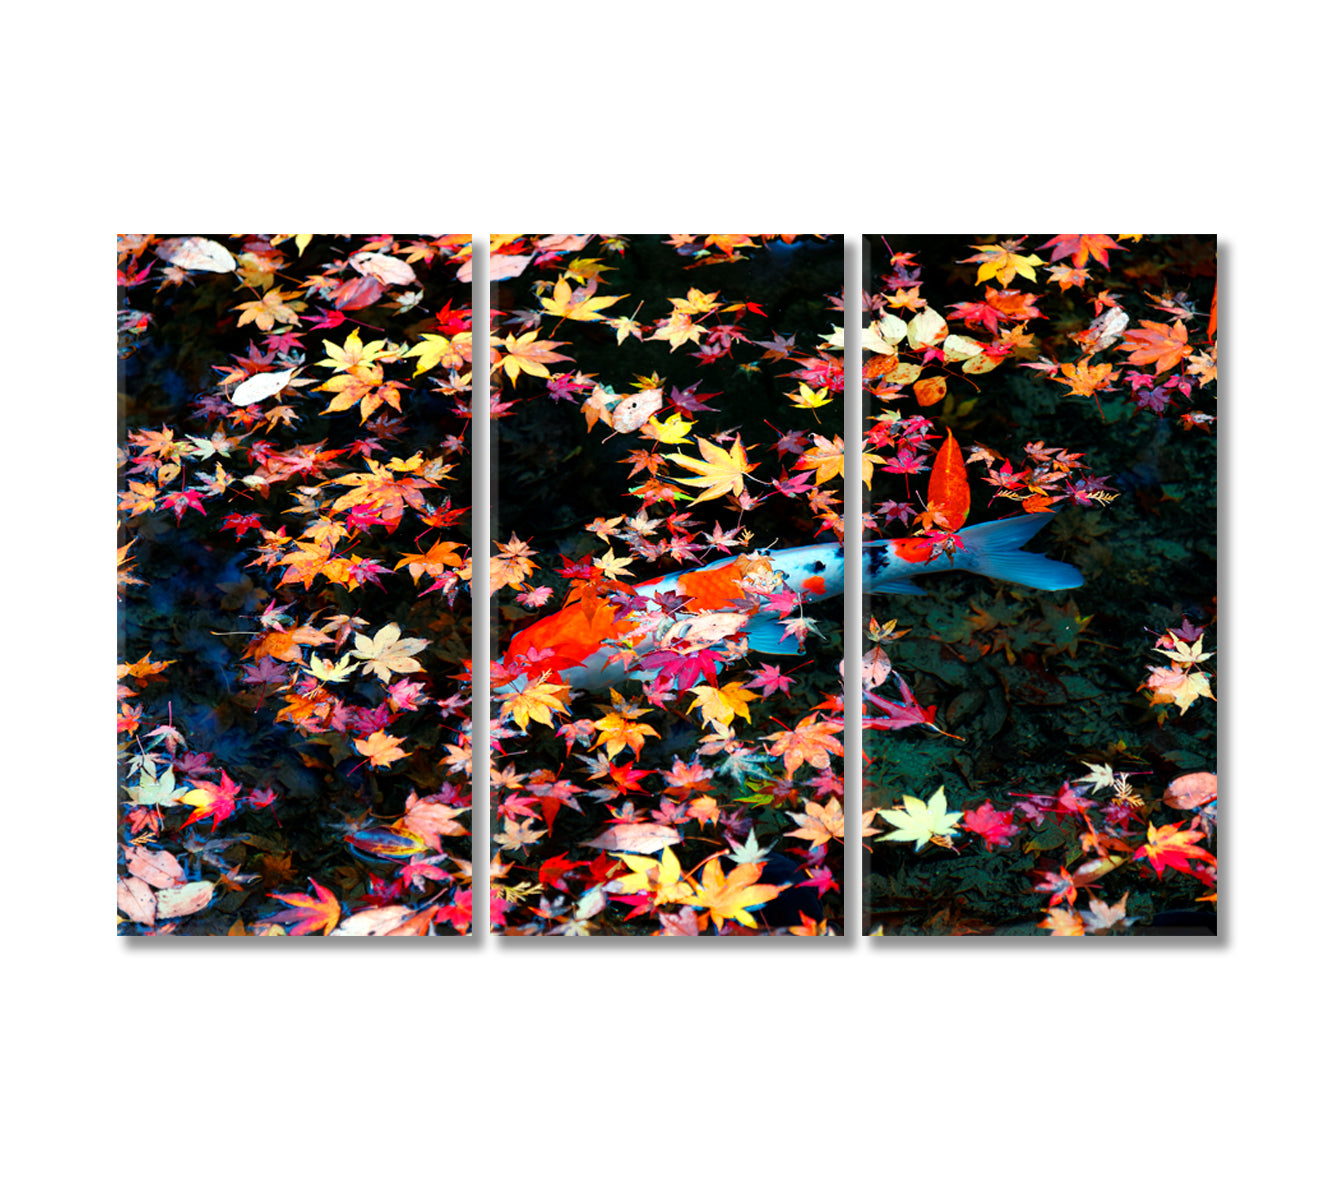 Koi Fish Fancy Carp in Pond with Maple Leaves Canvas Print-Canvas Print-CetArt-3 Panels-36x24 inches-CetArt